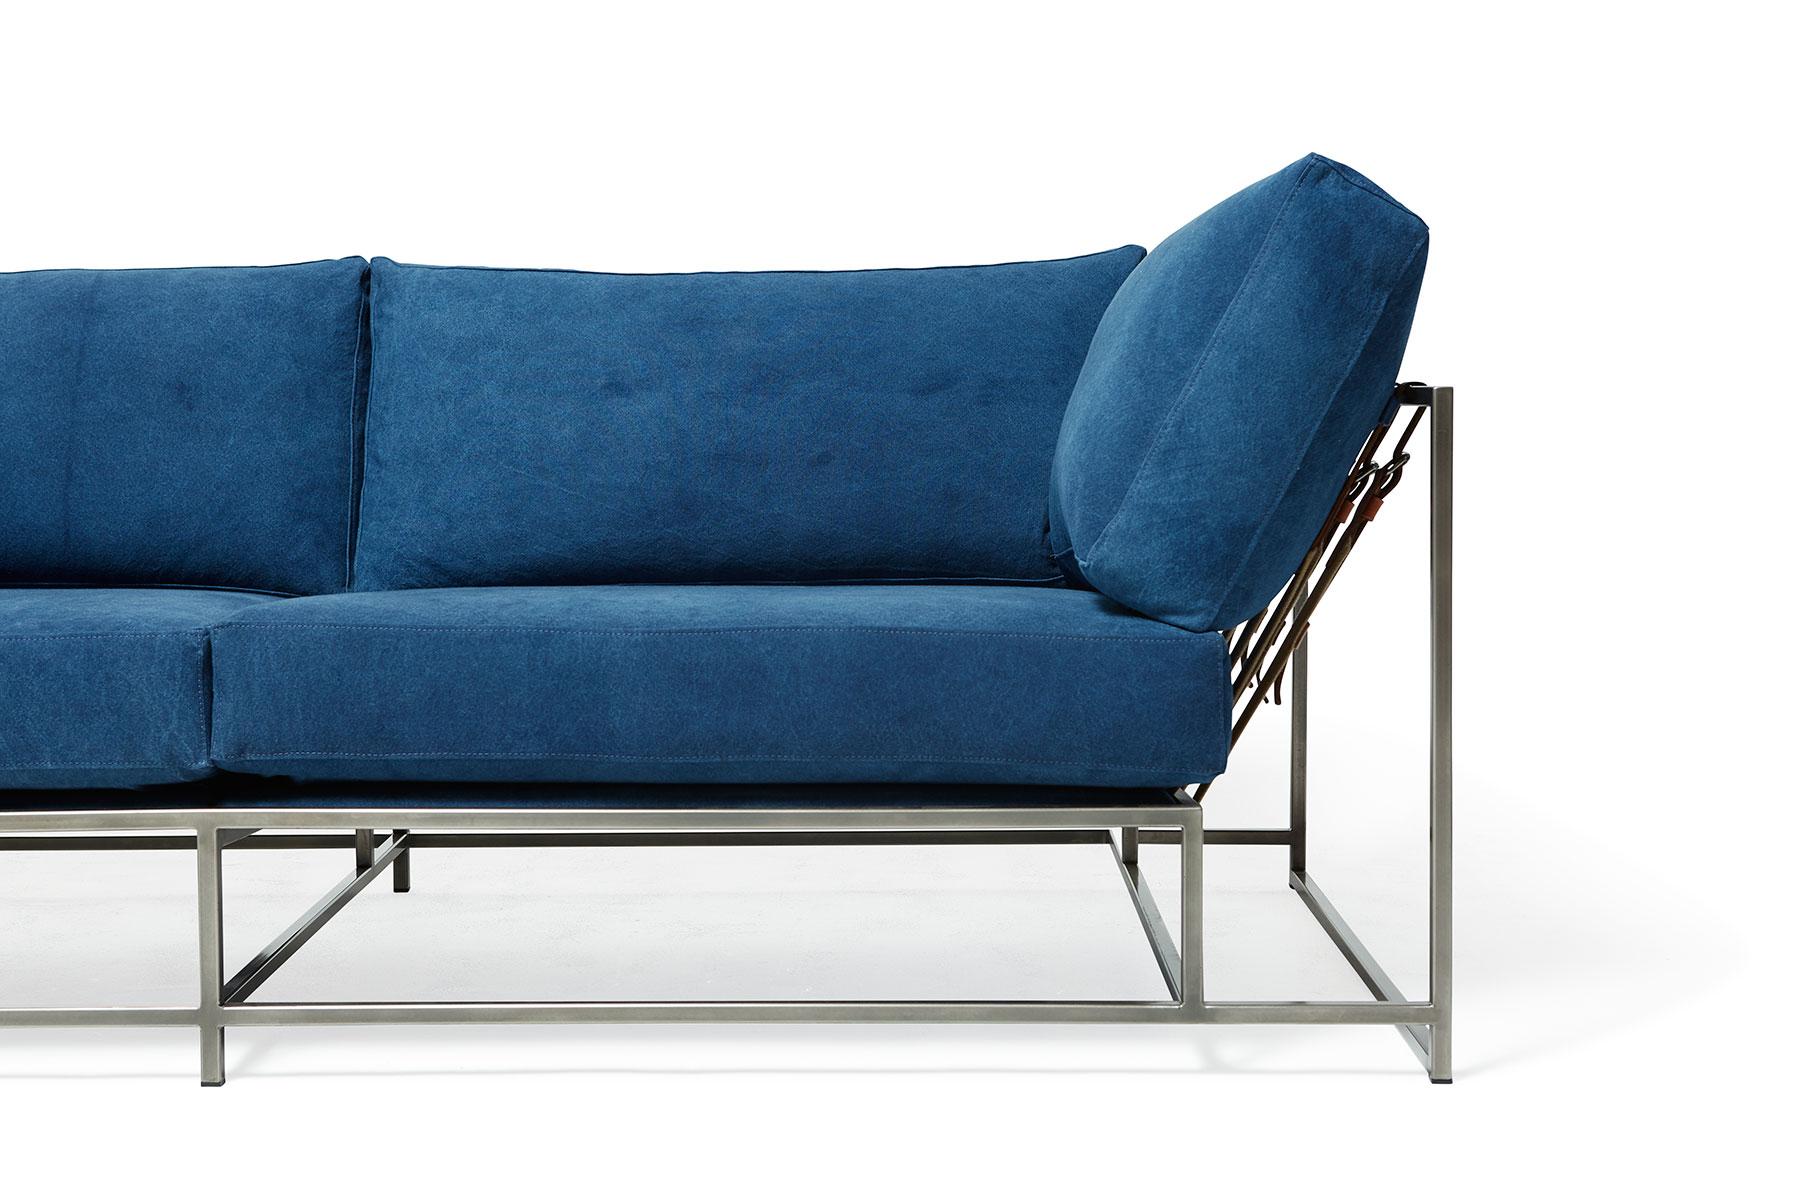 American Hand-Dyed Indigo Canvas and Antique Nickel Two-Seat Sofa For Sale